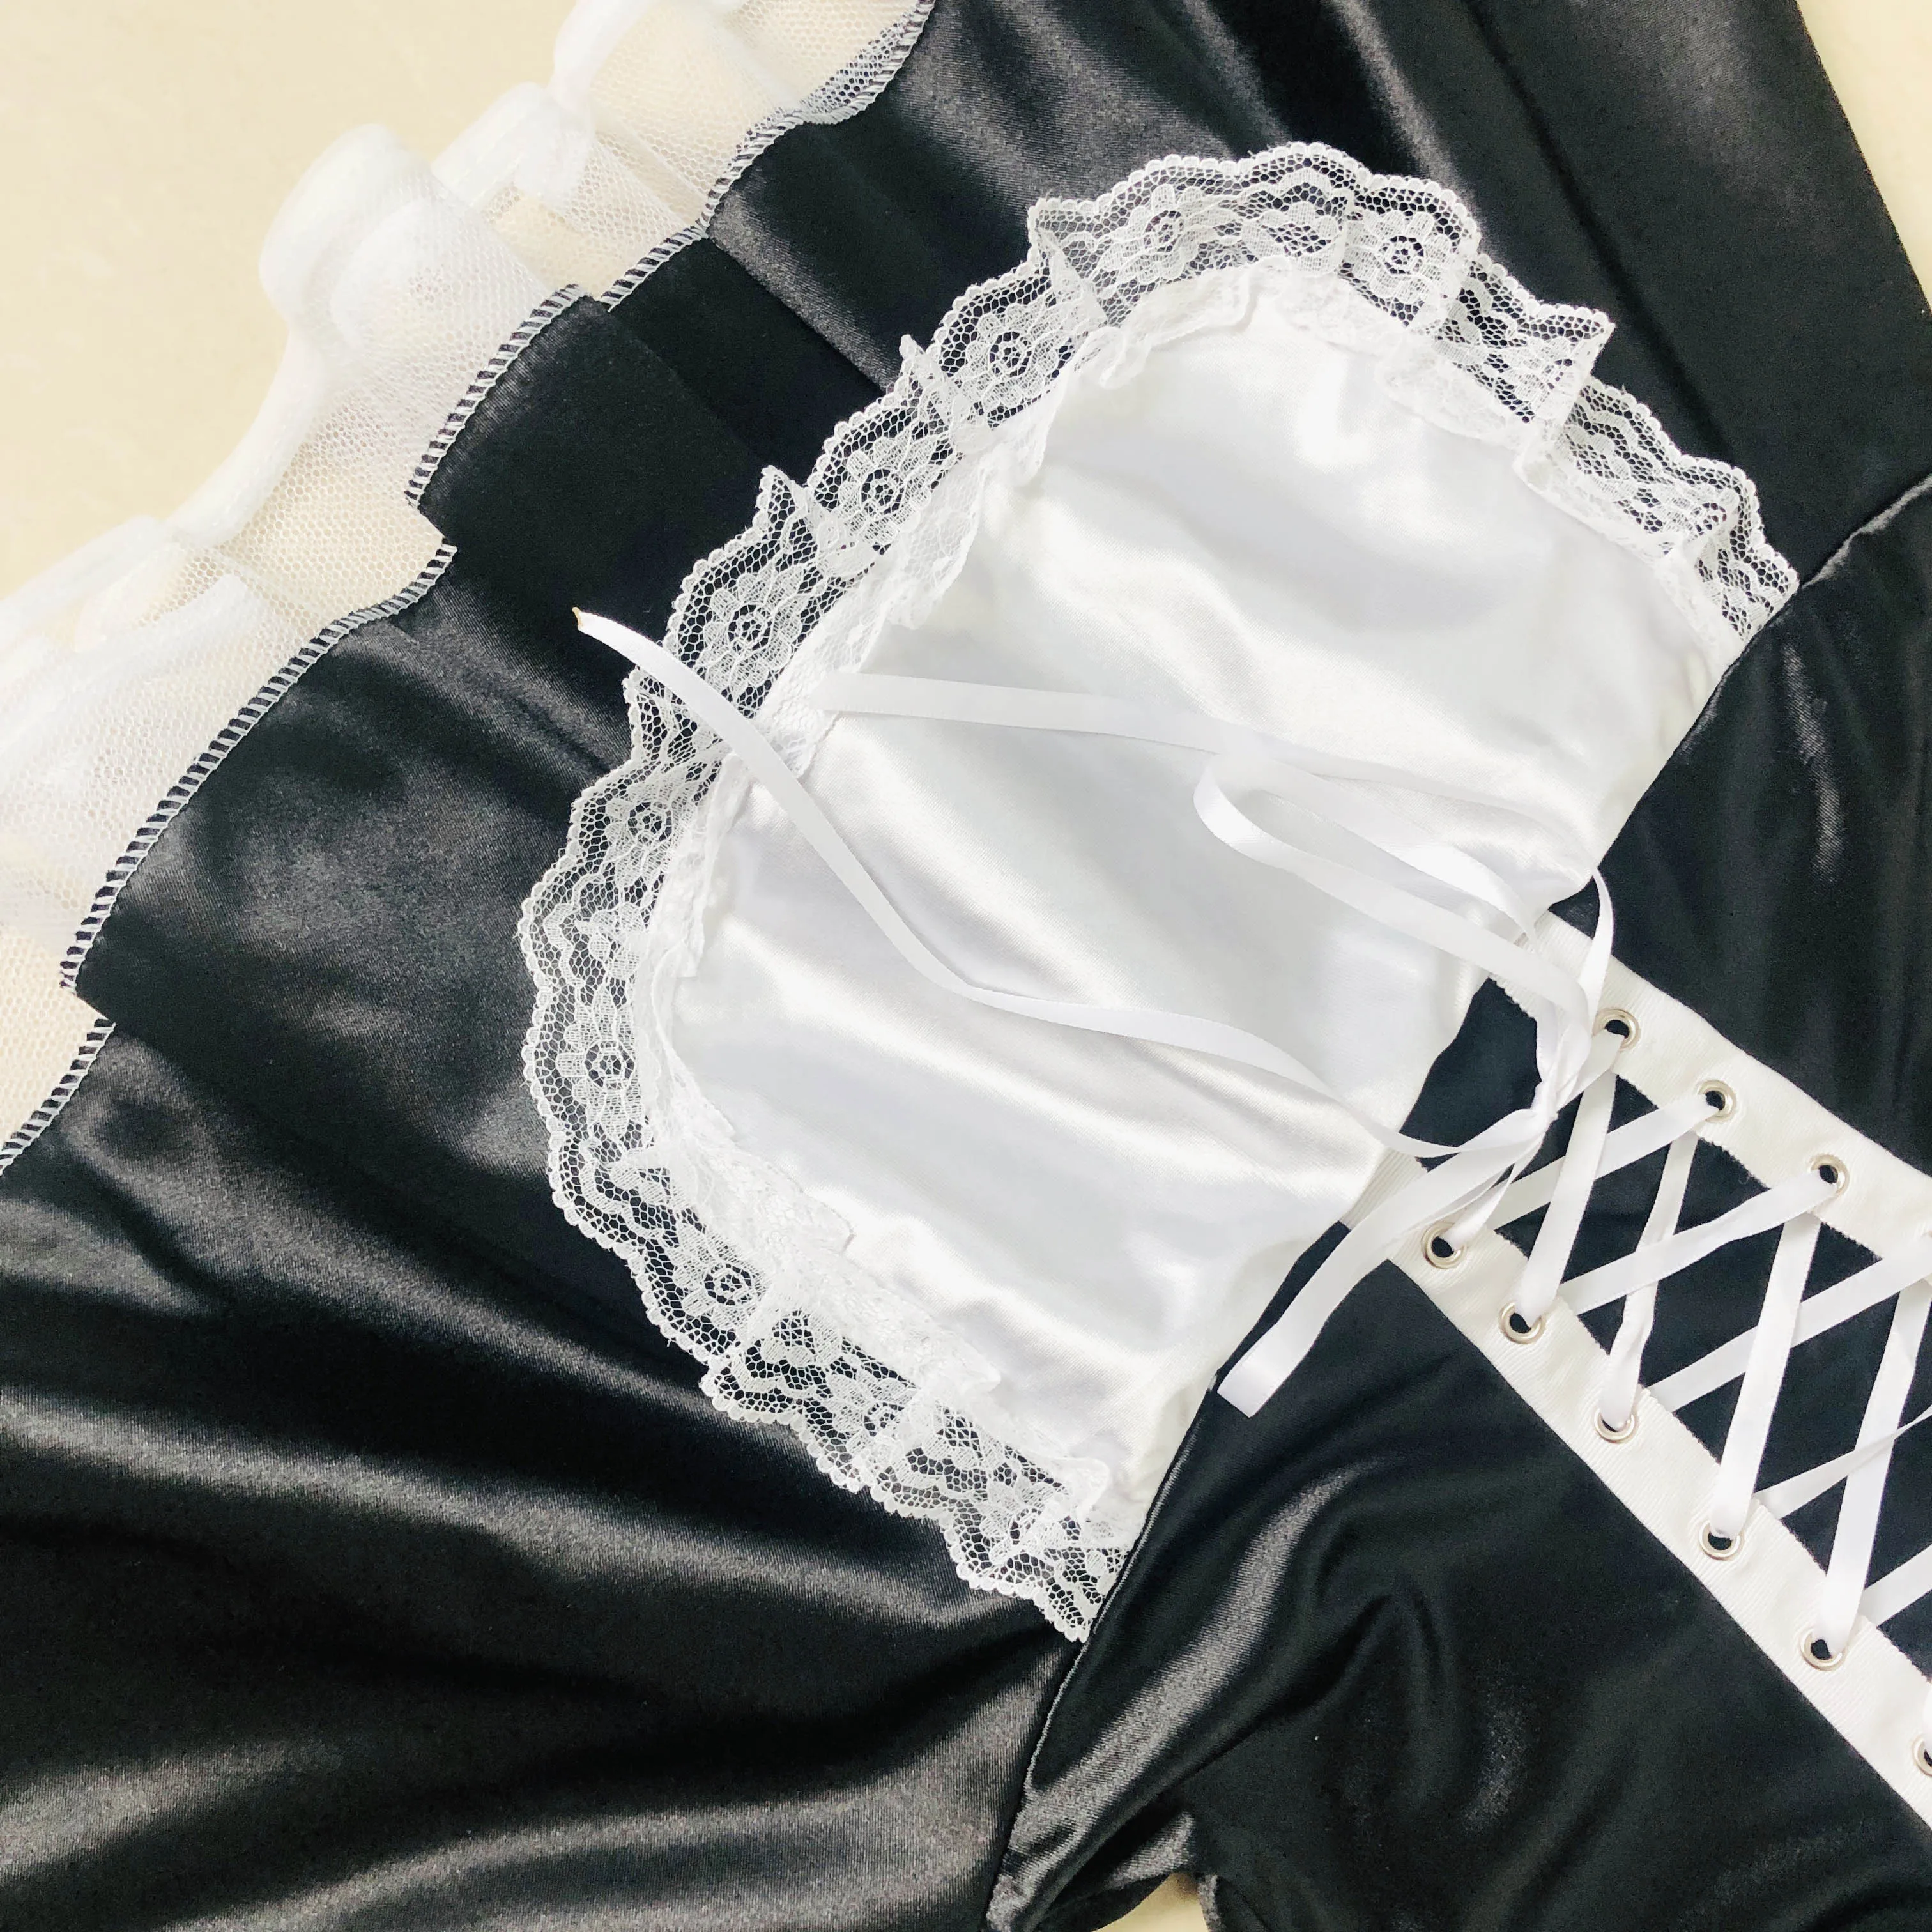 Utmeon Plus Size S-6xl Sexy Costumes Women’s Night French Maid Cosplay Costume For Halloween Exotic Servant Dress -Outlet Maid Outfit Store H33924907ecf4436f8e4758984a726c30W.jpg